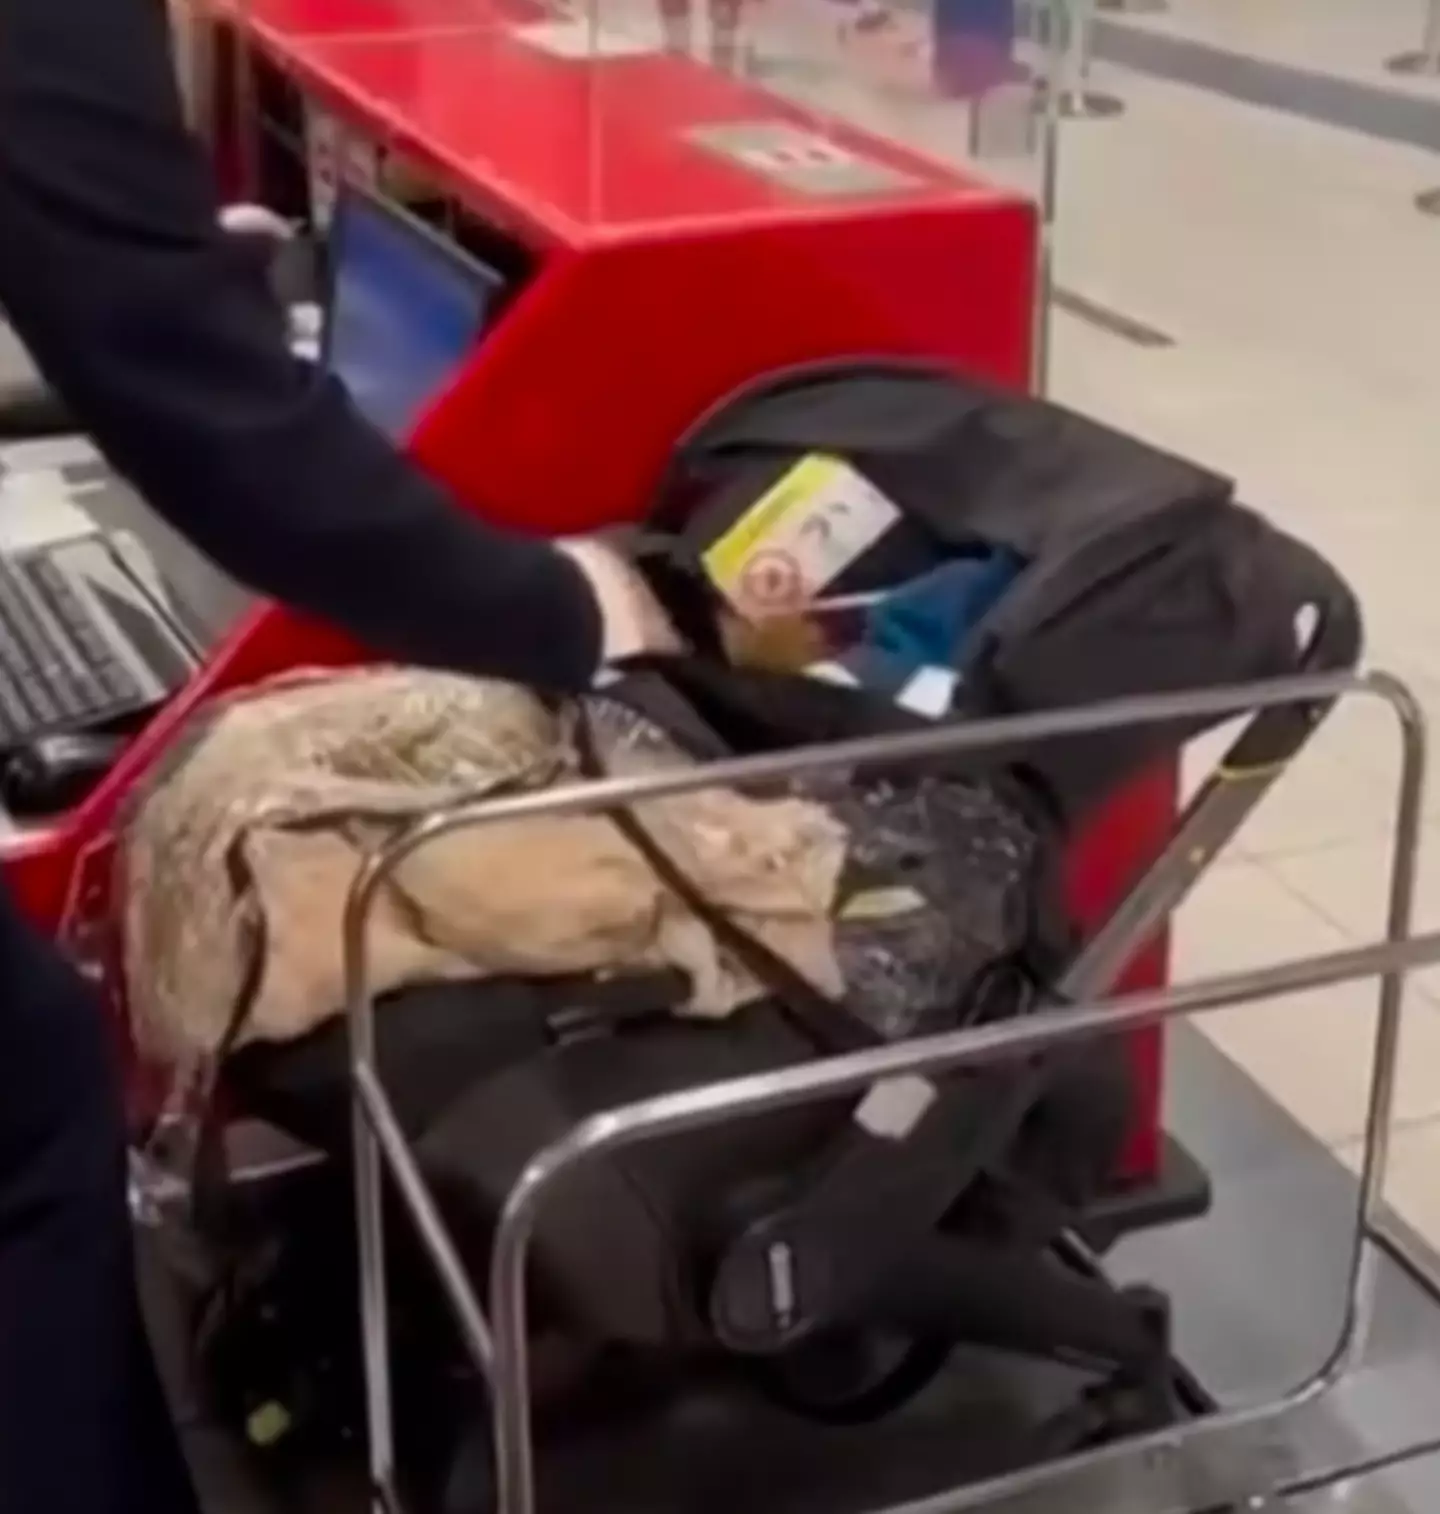 Footage shows airport staff peeling back the blanket lying on top of the baby carrier to find a baby lying underneath.